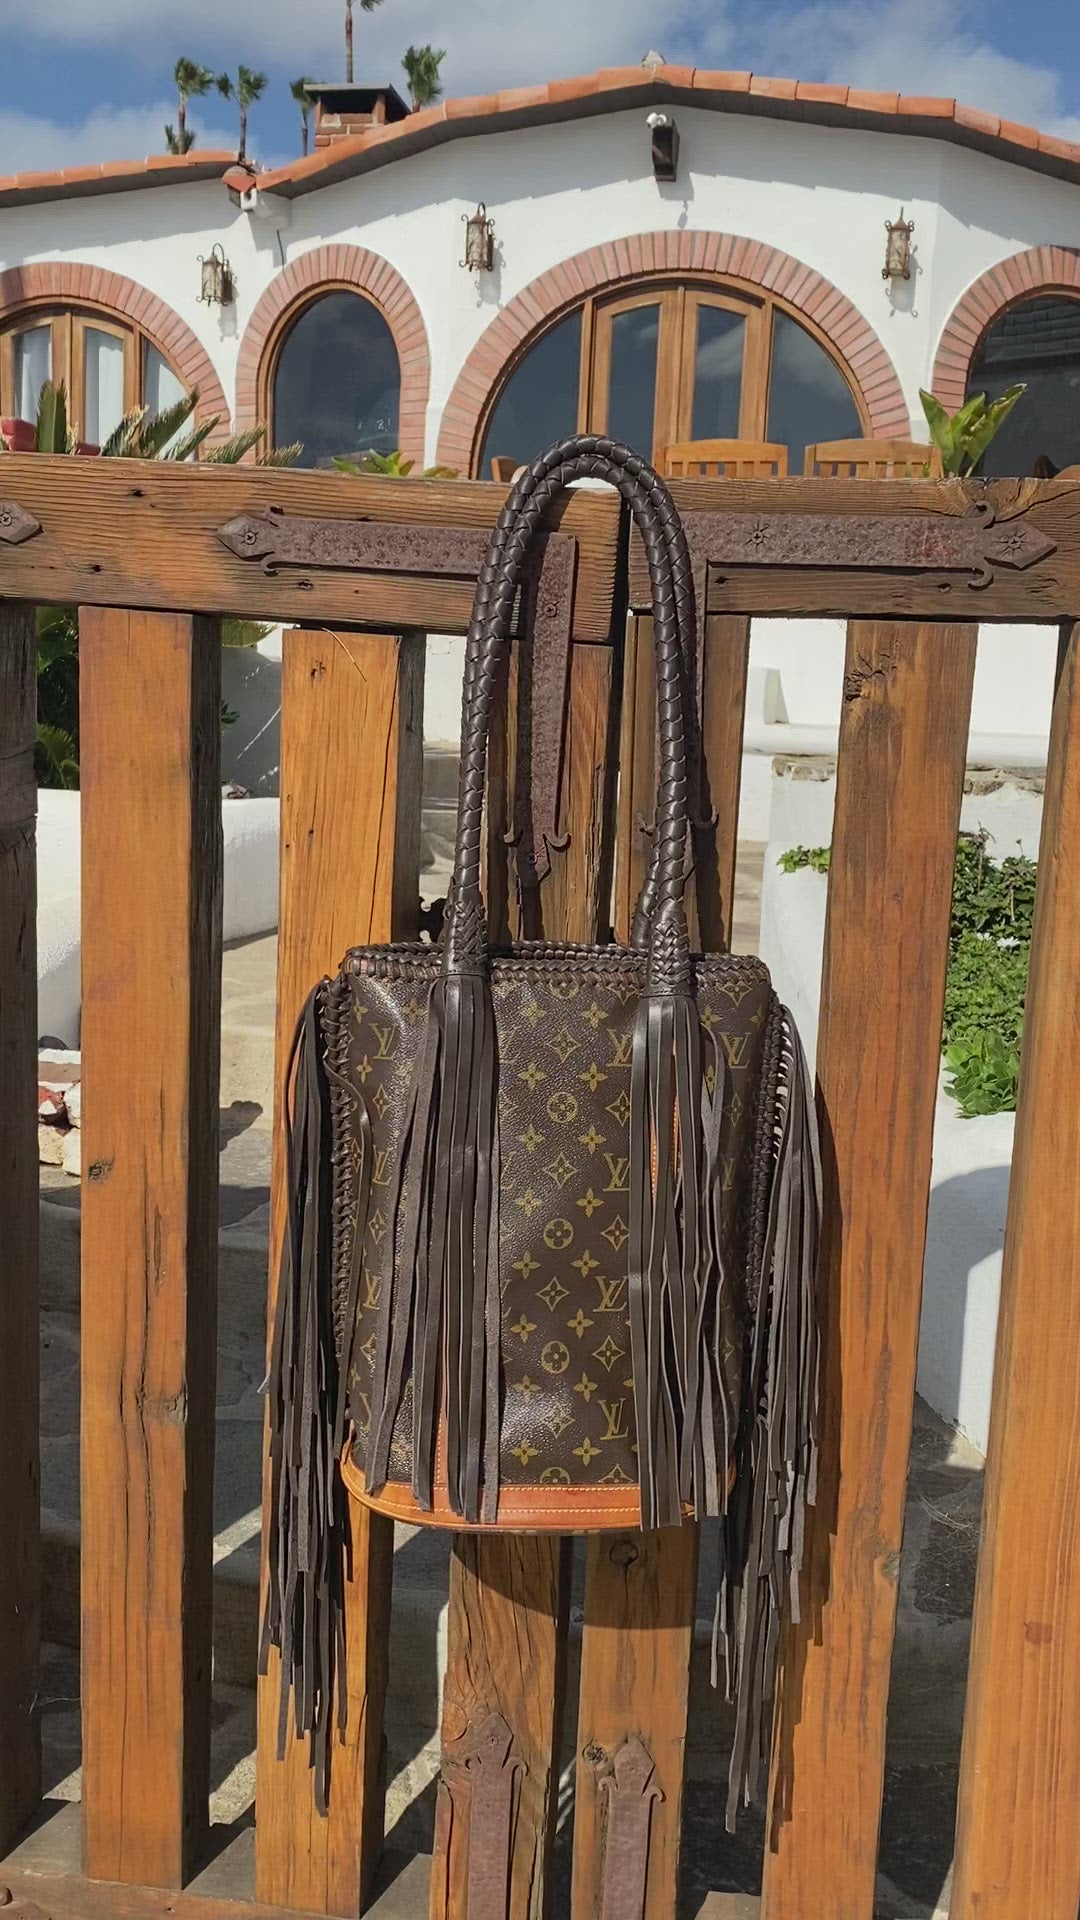 Authentic Louis Vuitton completely relined GM bucket with Cheetah